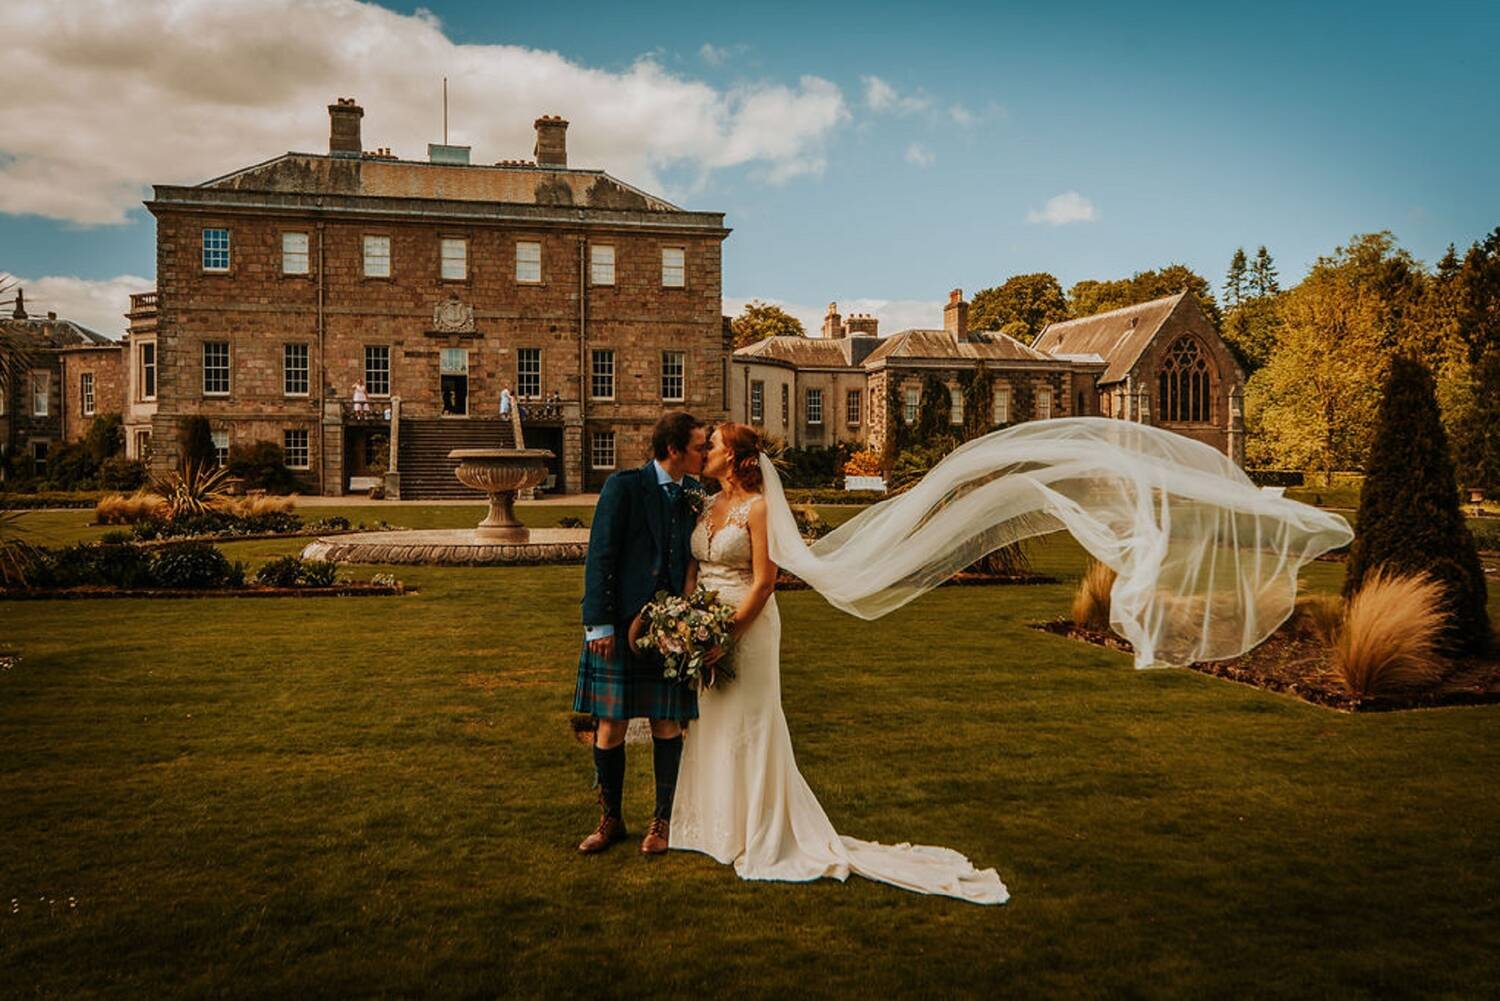 A bride and groom stand kissing on a lawn in front of a grand stately home. A fountain is just behind them. The wind is catching the bride's long veil, blowing it away from her.